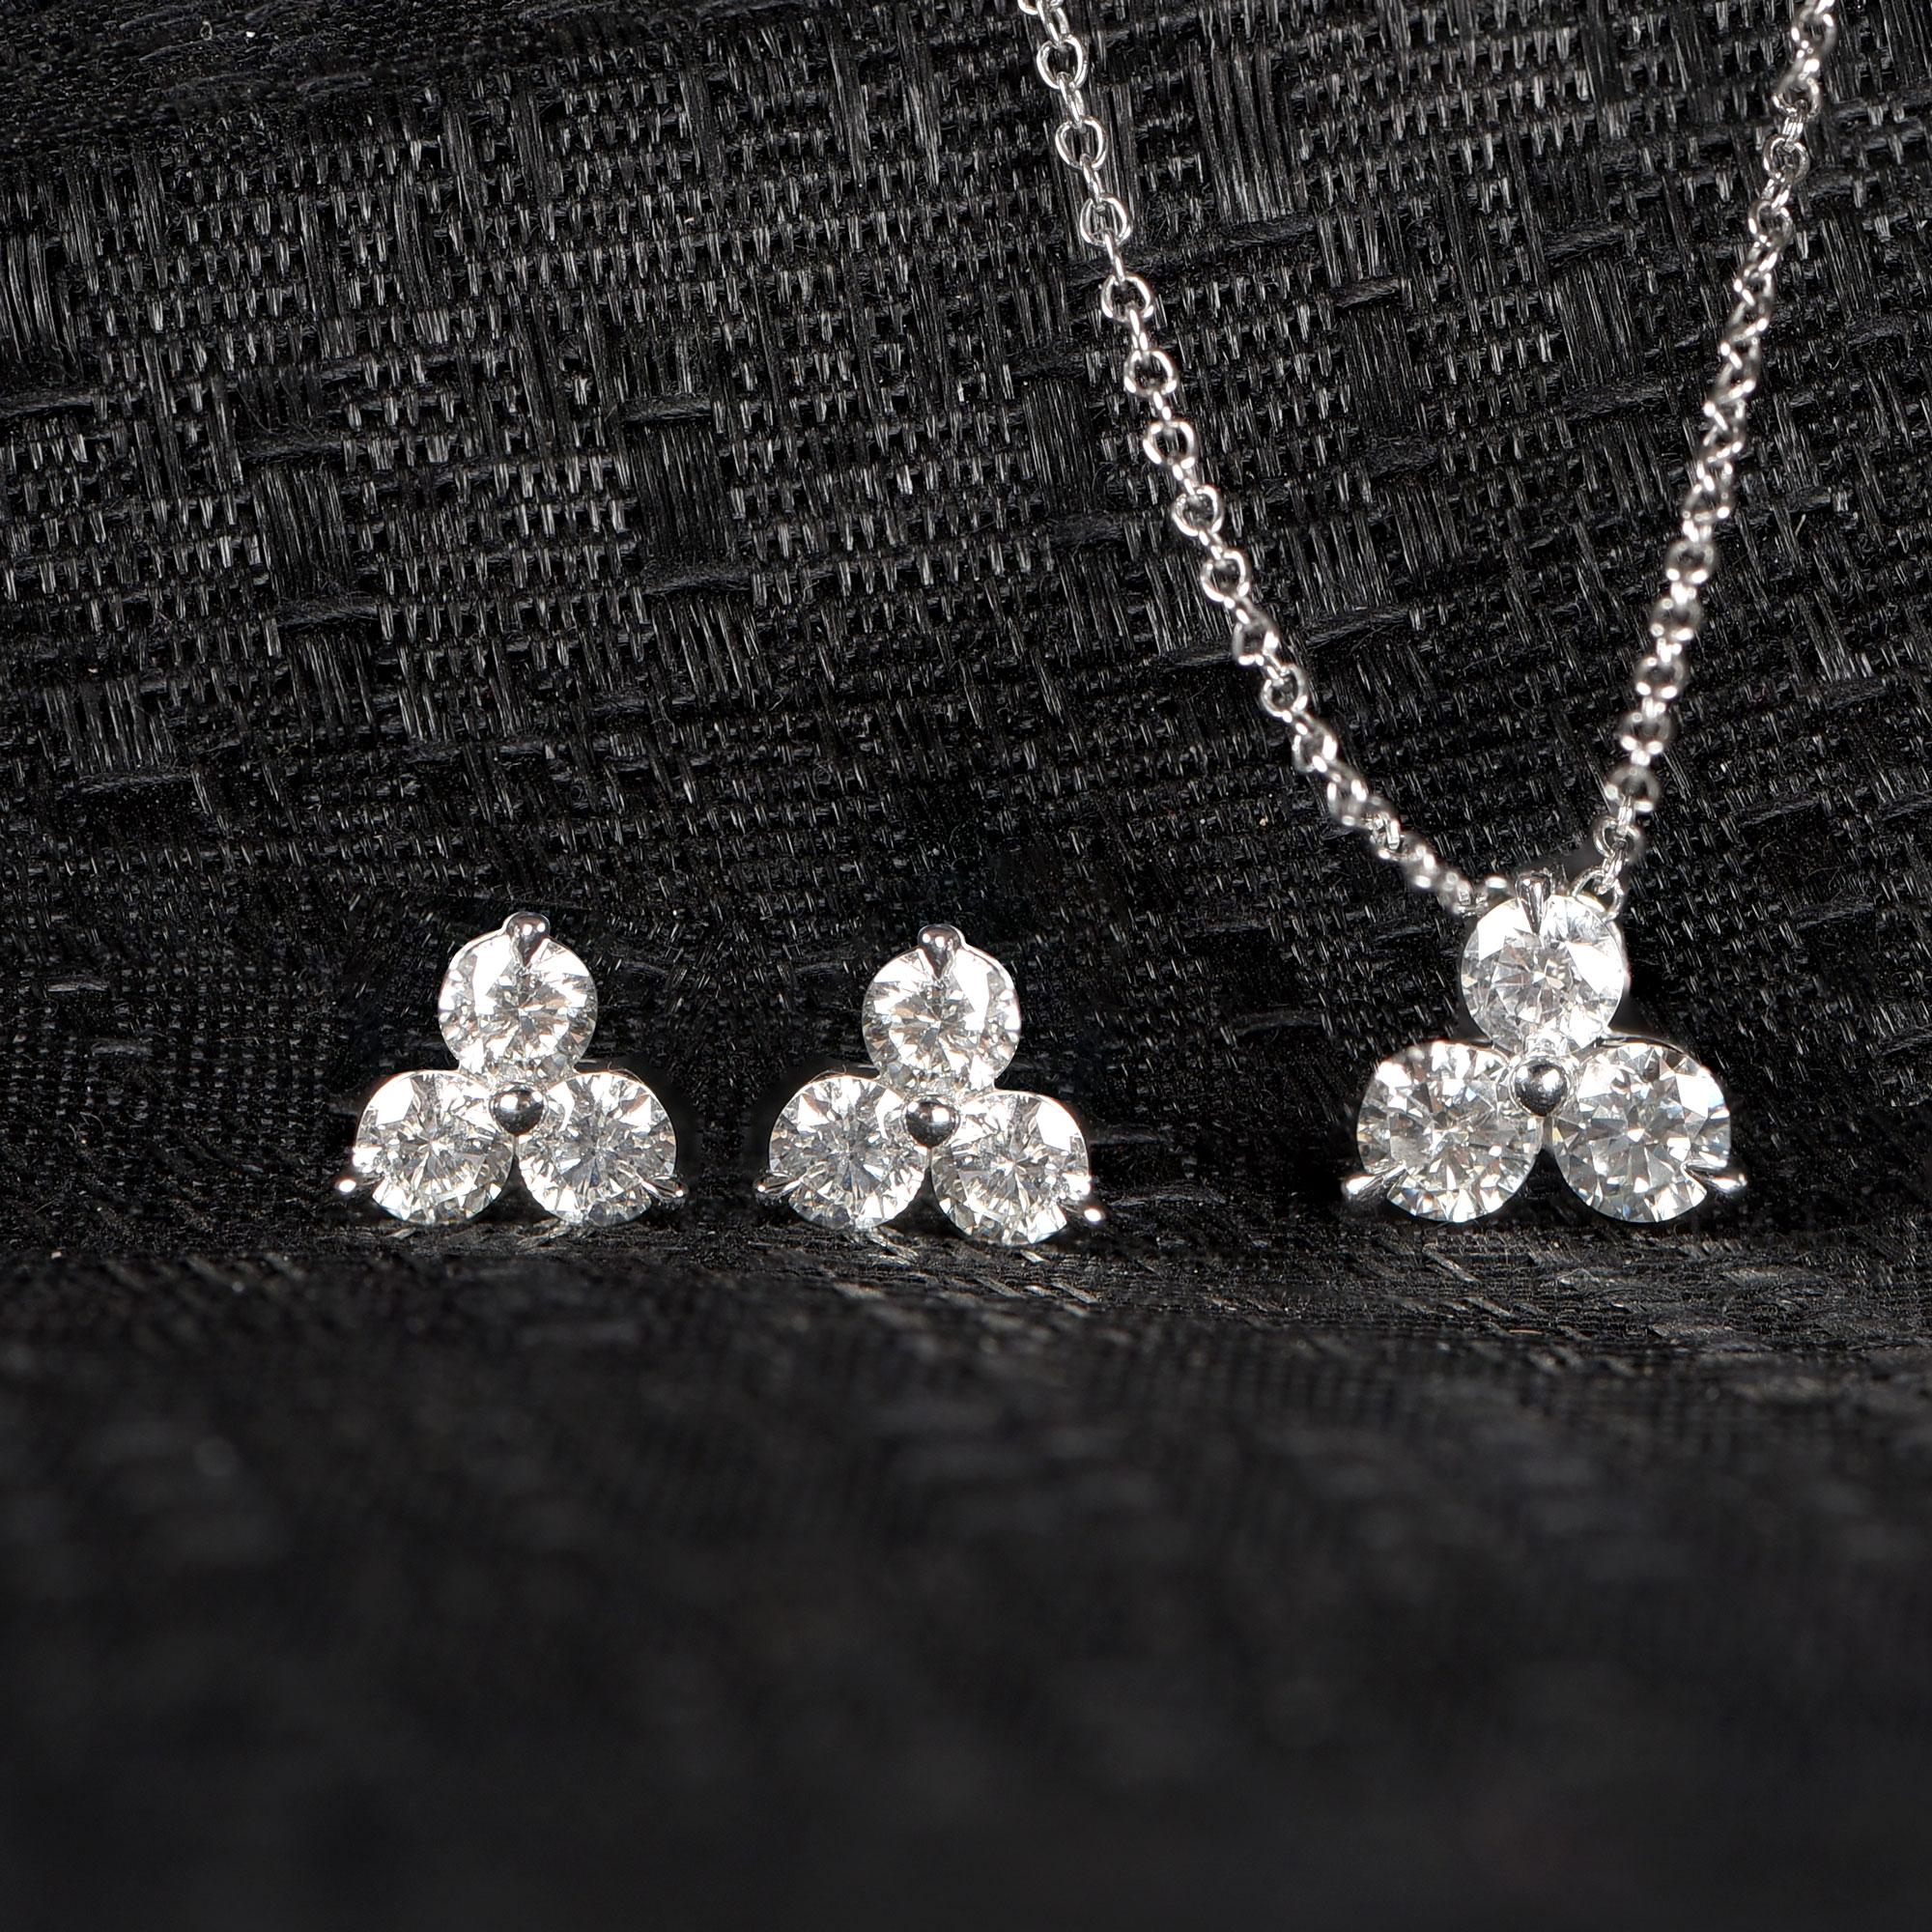 This diamond earring and pendant set glitters with a total of 9 brilliant-cut diamonds set in prong setting and handcrafted in 14-karat white gold. The diamonds are graded HI Color, I1 Clarity.